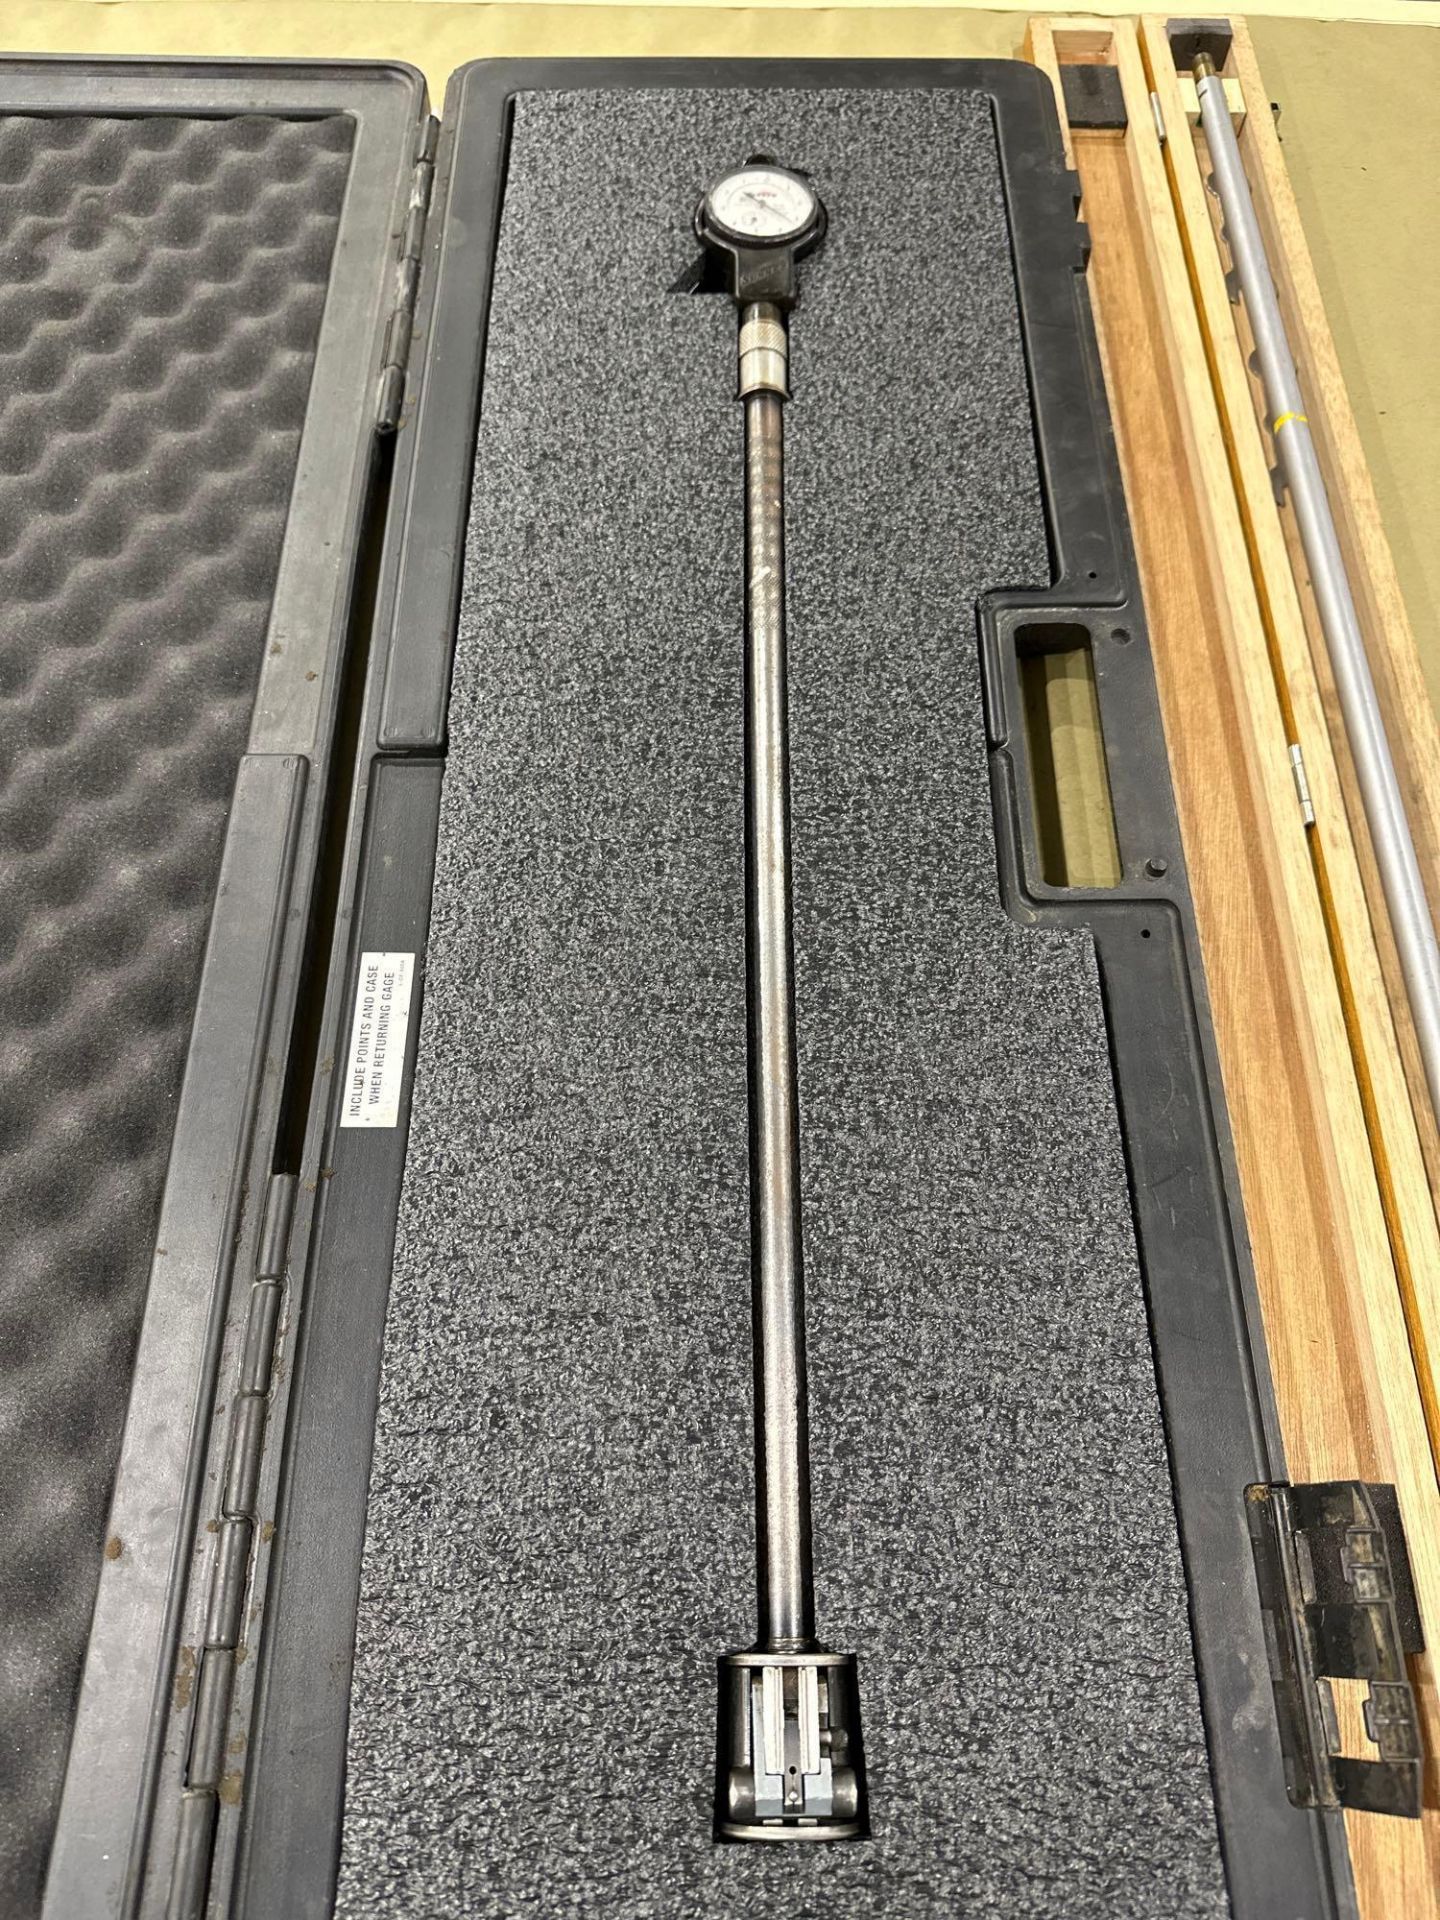 Lot of 2: (1) Mitutoyo Extension Rod 40” Length, (1) Sunnen Retractable Dial Bore Gage, 2”-6” Dia - Image 9 of 10